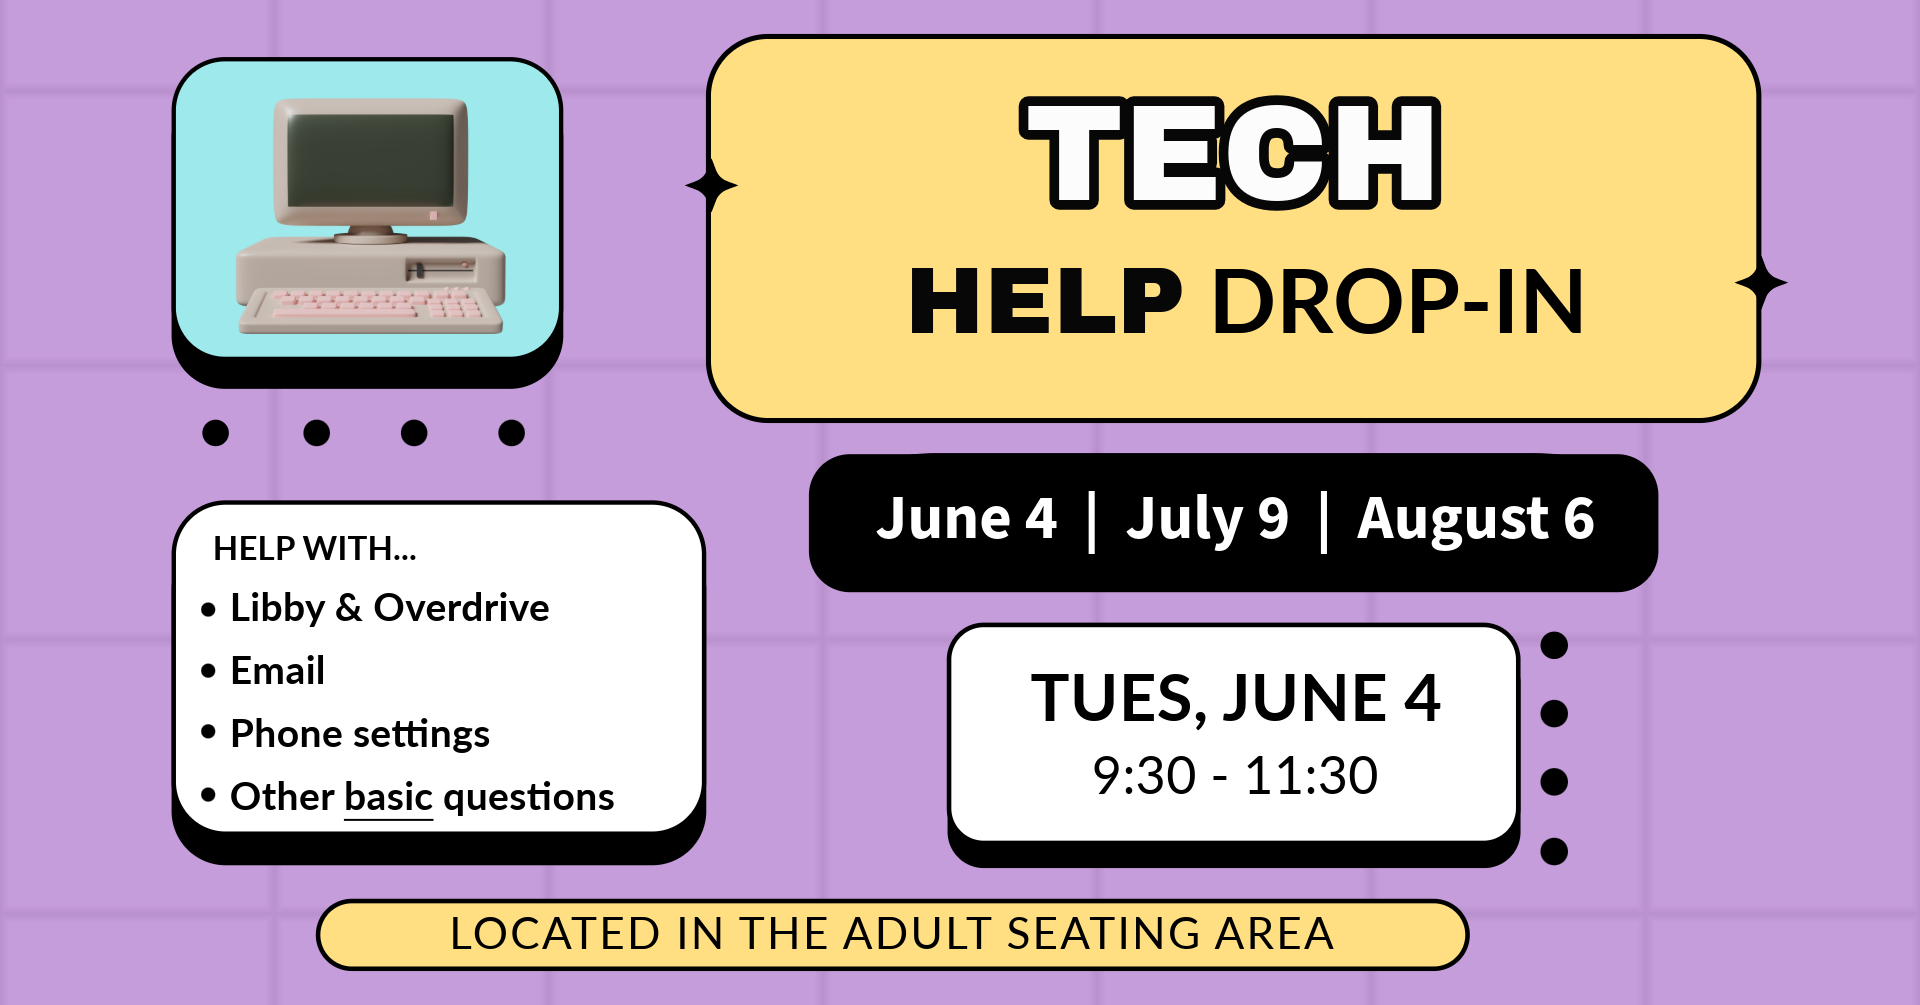 Tech Help Drop-In. June 4, July 9, August 6. Tues, June 4, 9:30 - 11:30. Help with Libby & Overdrive, Email, Phone settings, Other basic questions. Located in the Adult Seating Area.